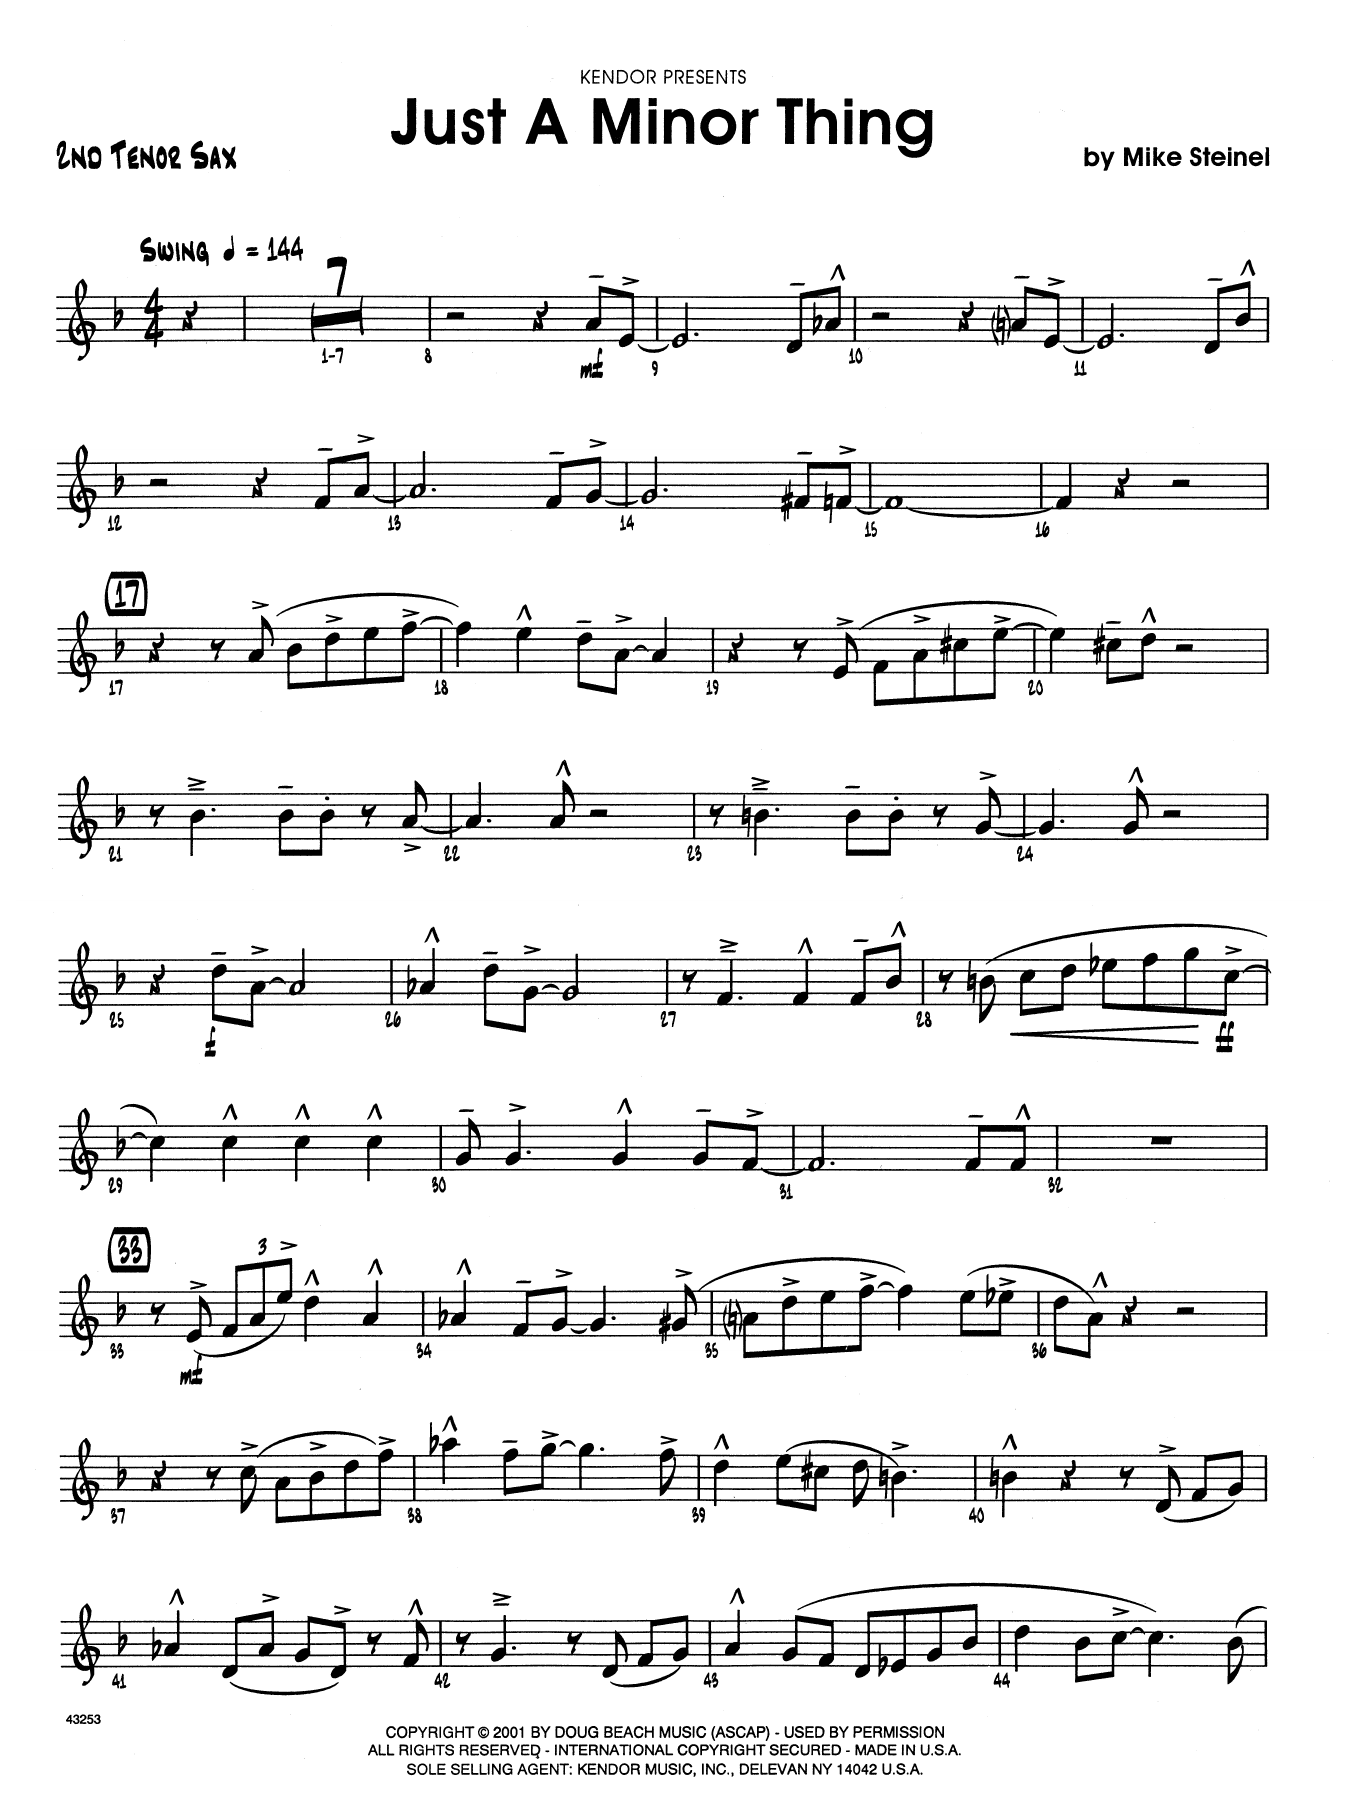 Download Mike Steinel Just A Minor Thing - 2nd Bb Tenor Saxop Sheet Music